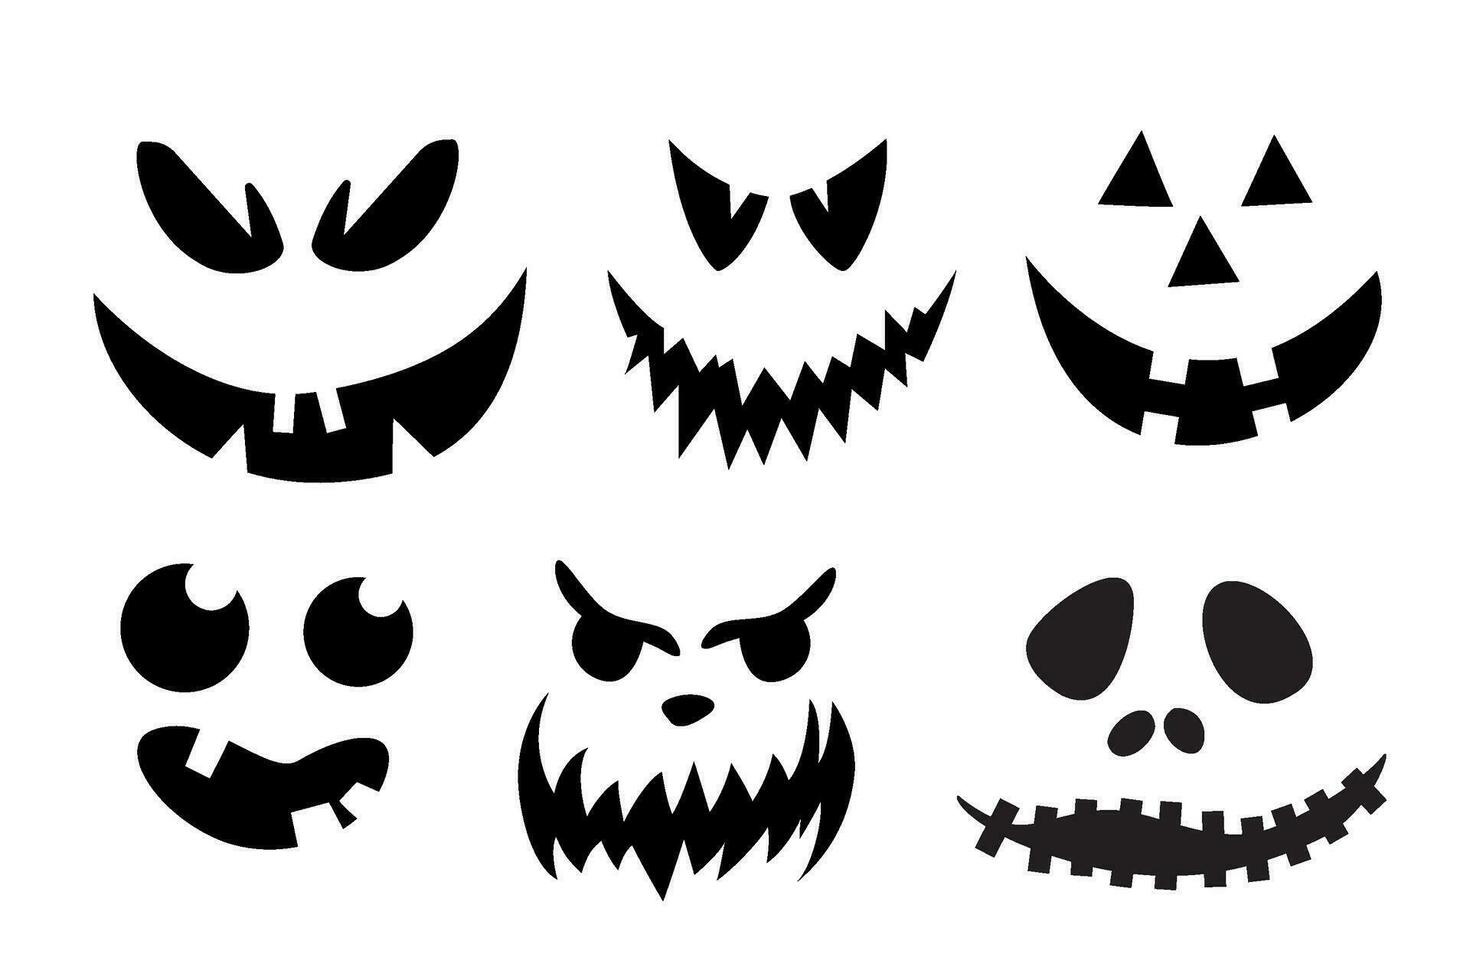 Scary and funny faces of Halloween pumpkin or ghost . Vector collection.